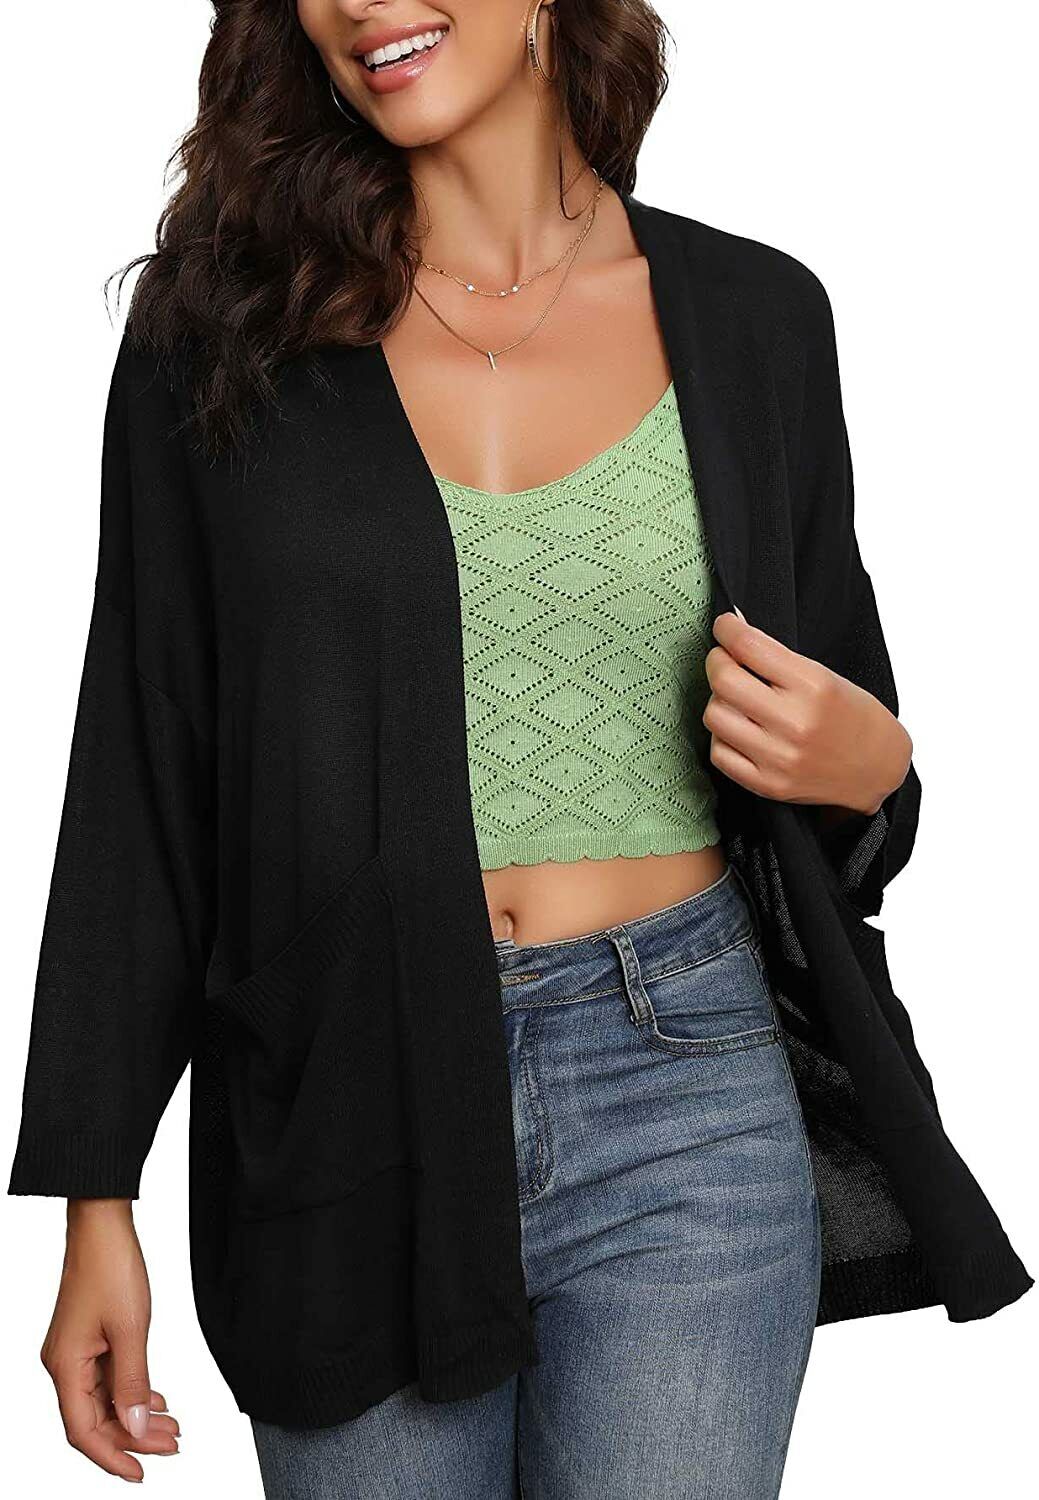 screech mareridt Ledig Womens Lightweight Summer Open Front Cardigan Sweaters Pockets Casual Cover  Up B | eBay